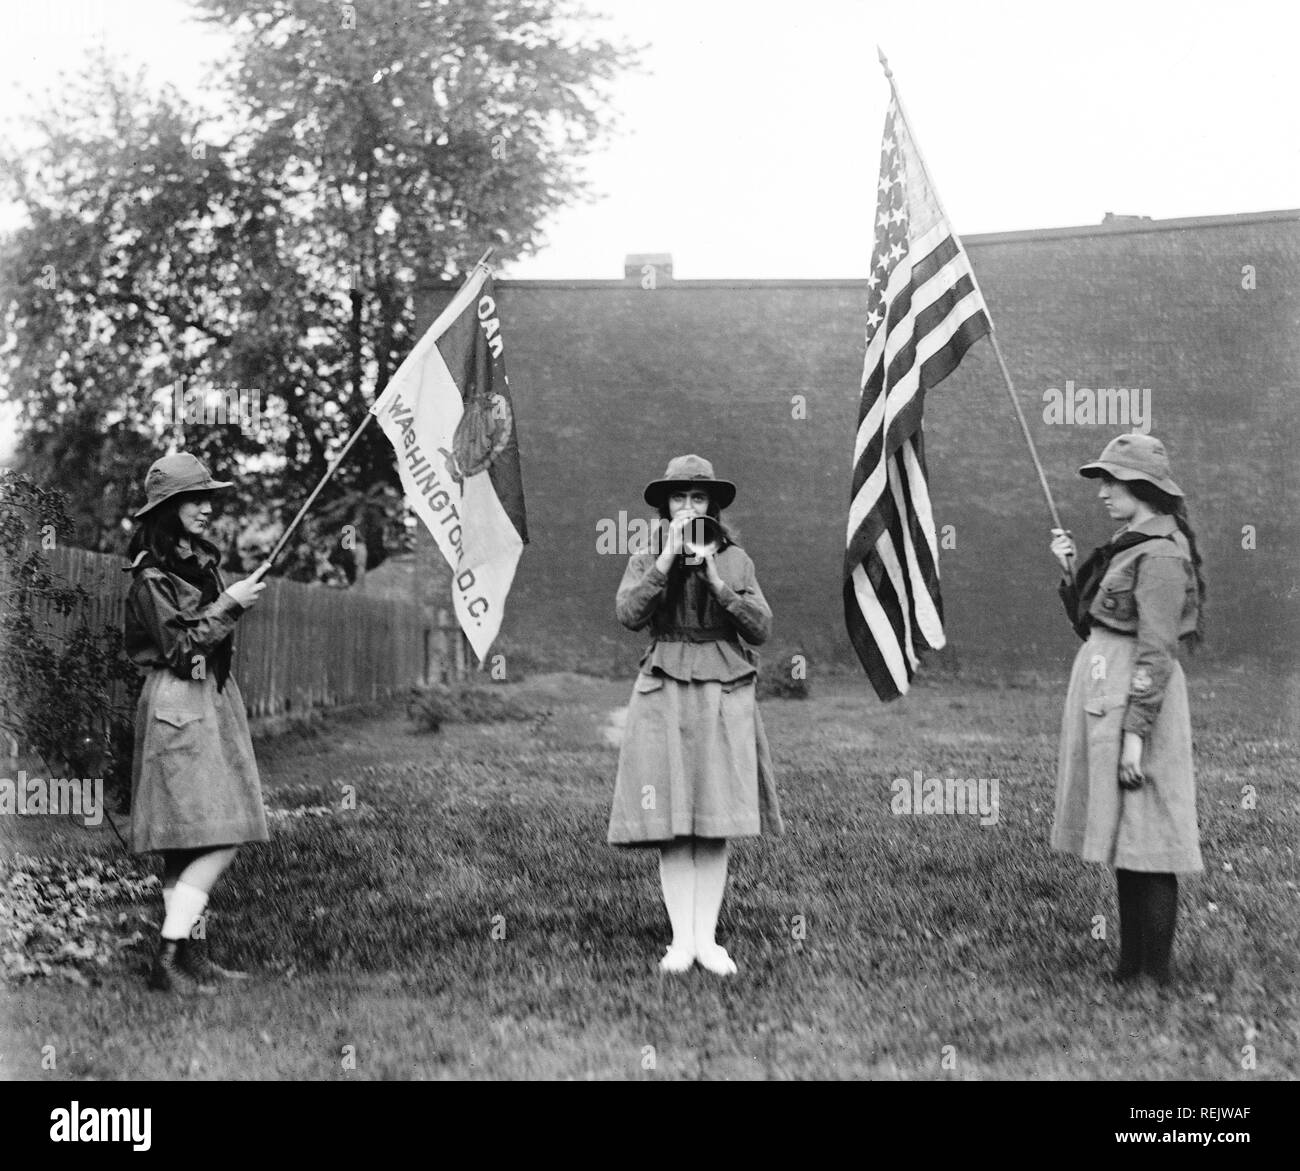 Three Girl Scouts, Two Holding Flags and one Playing Trumpet, Washington DC, USA, National Photo Company, 1920 Stock Photo